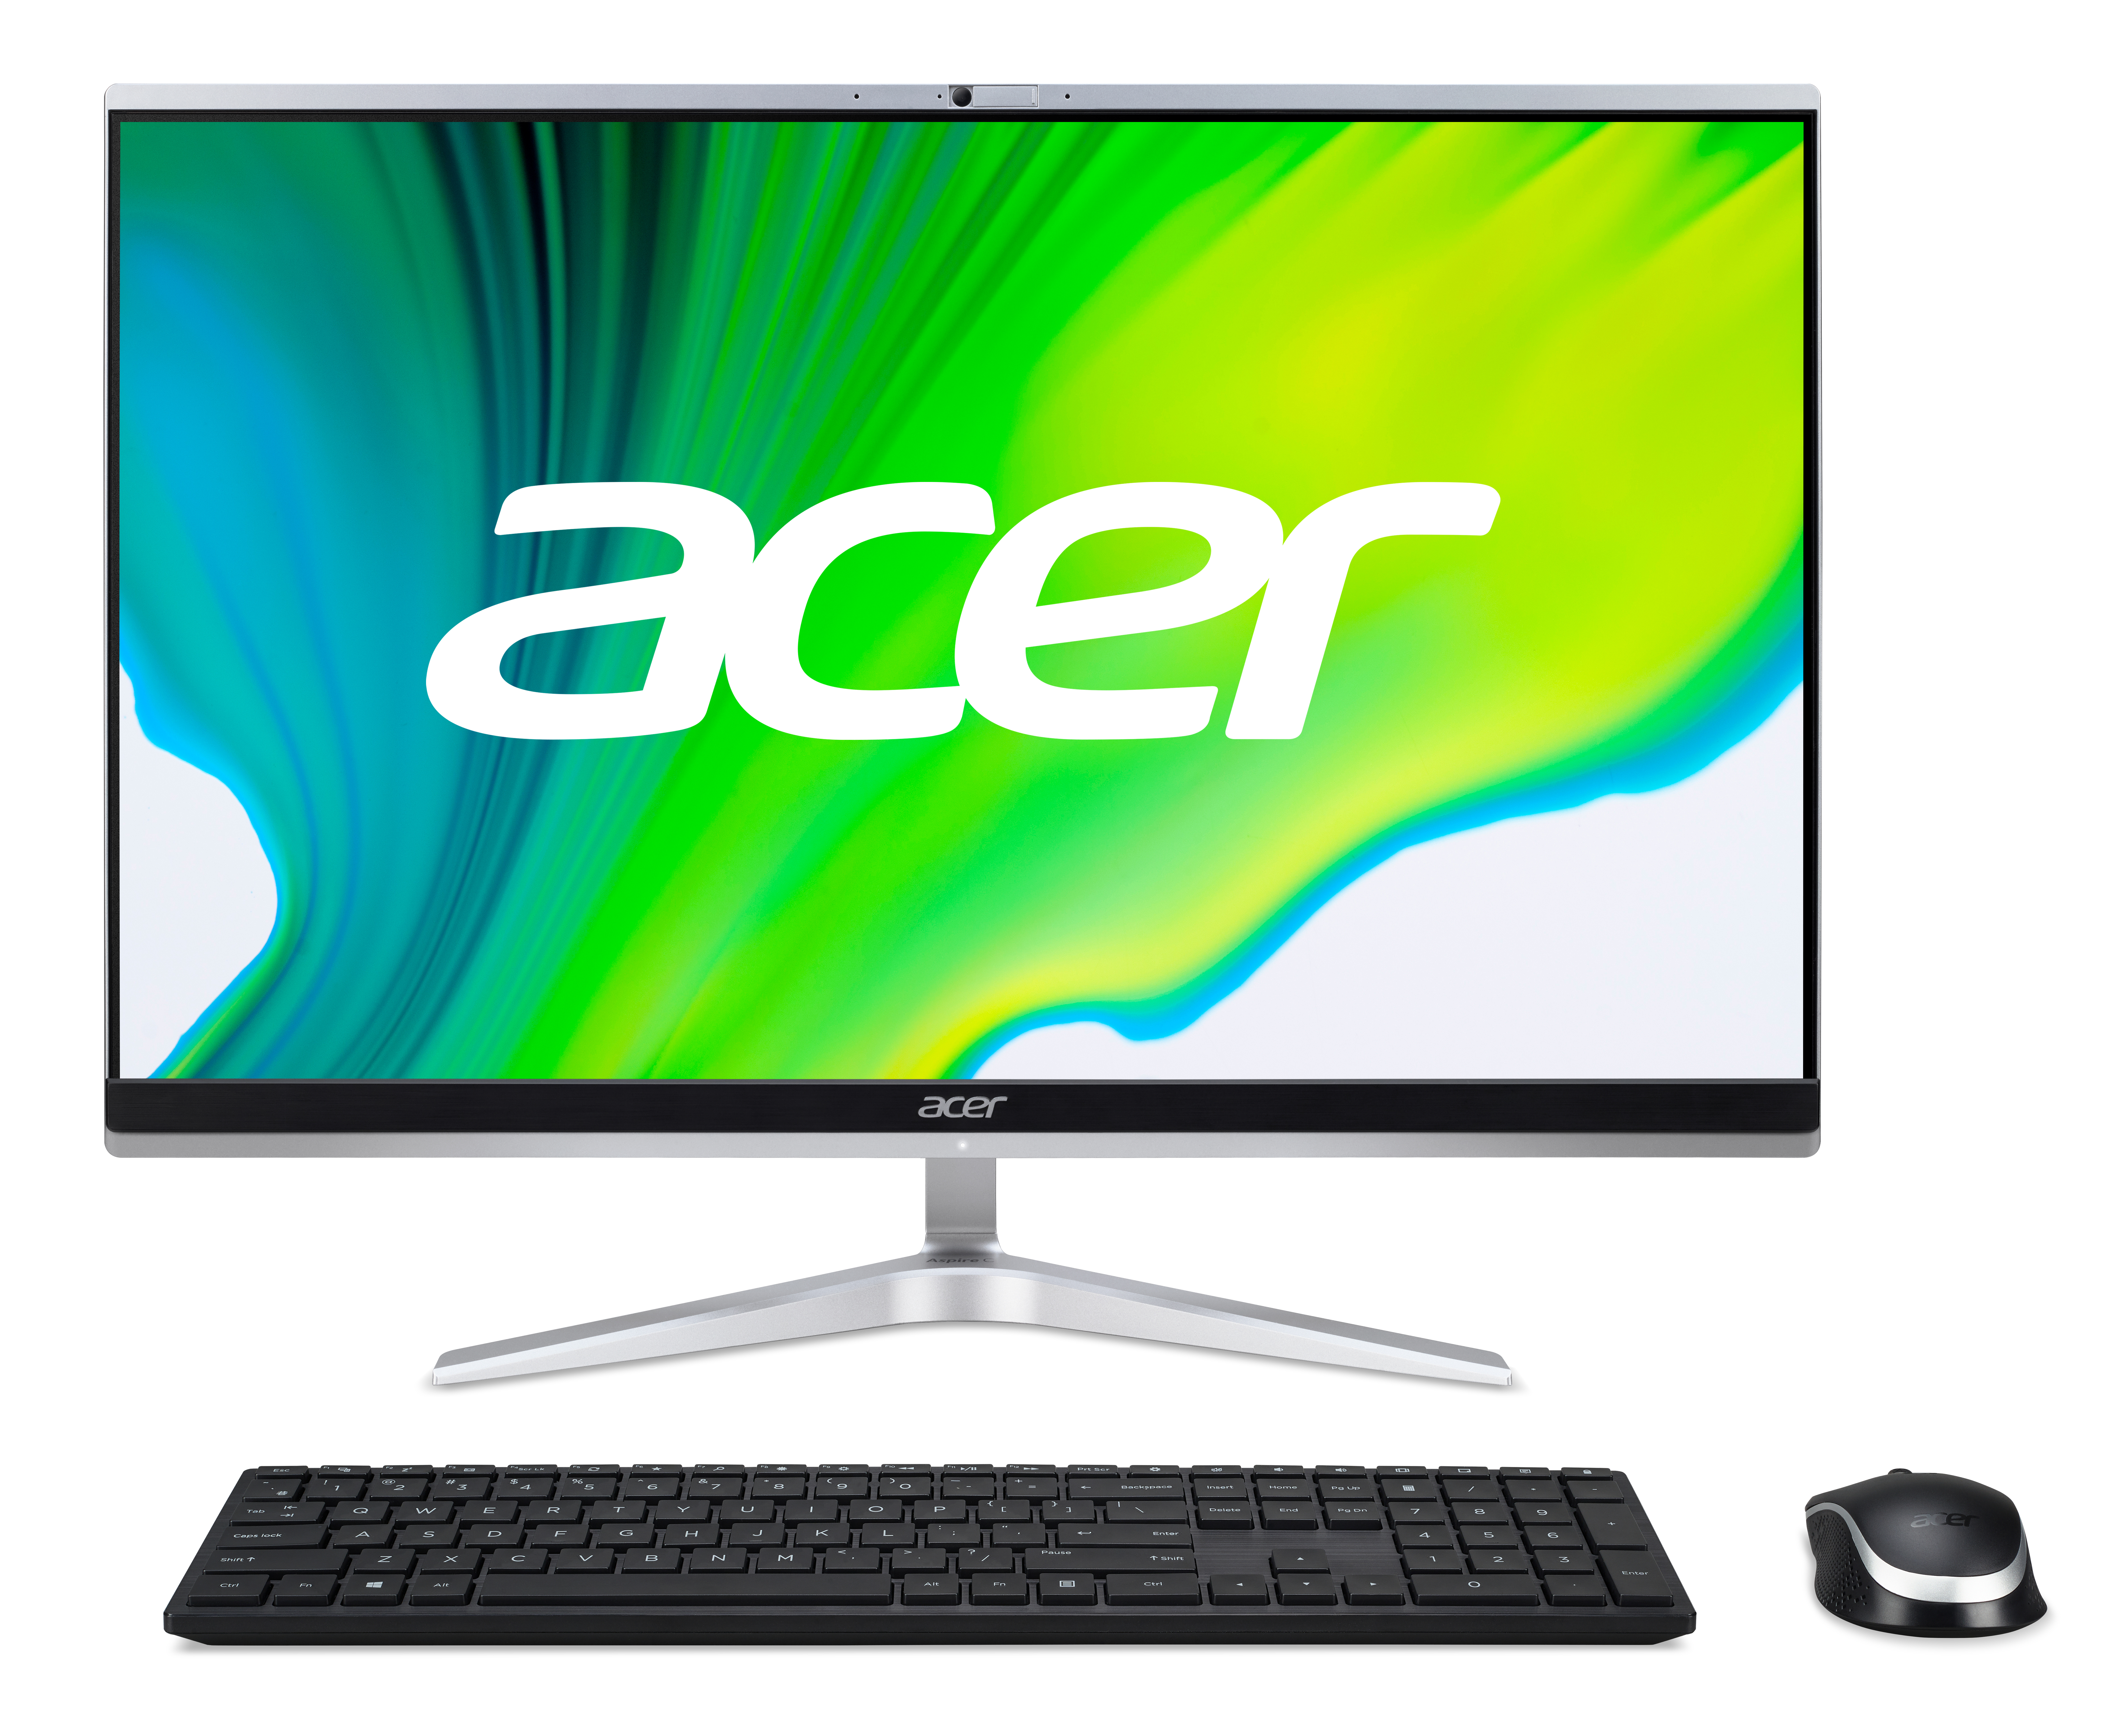 Acer Aspire C24-1650 All-in-One PC, 23.8i FHD, i5-1135G7, 8GB DDR4,- 256GB PCIe NVMe SSD + 1TB HDD, IrisXe Graphics - QWERTY - Windows11 Home